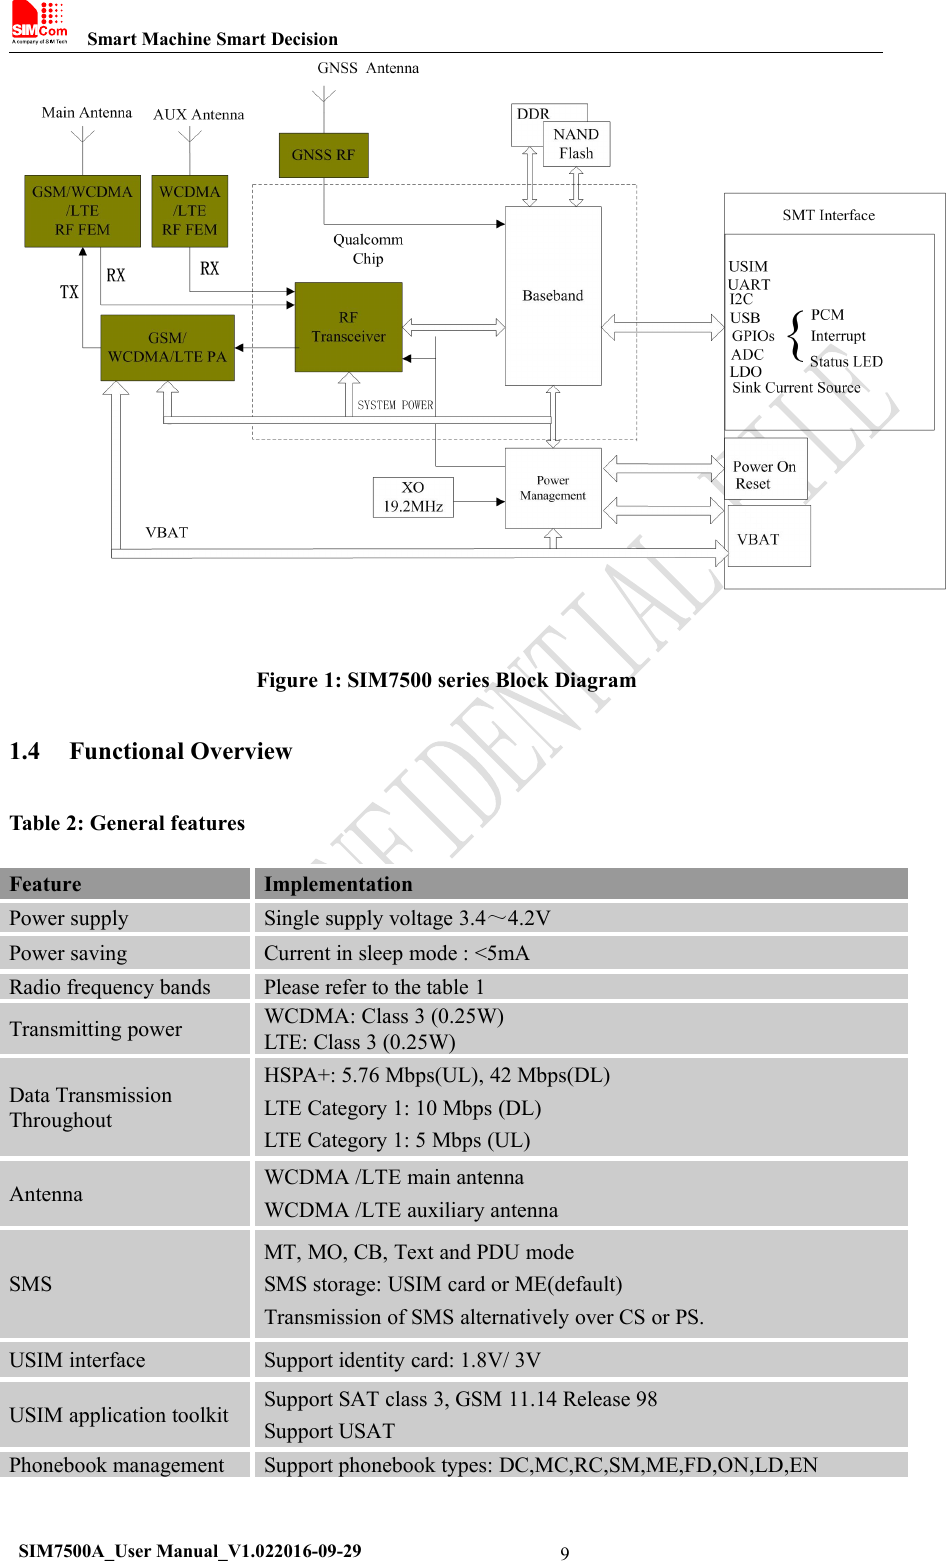 Smart Machine Smart DecisionSIM7500A_User Manual_V1.022016-09-299Figure 1: SIM7500 series Block Diagram1.4 Functional OverviewTable 2: General featuresFeatureImplementationPower supplySingle supply voltage 3.4～4.2VPower savingCurrent in sleep mode : &lt;5mARadio frequency bandsPlease refer to the table 1Transmitting powerWCDMA: Class 3 (0.25W)LTE: Class 3 (0.25W)Data TransmissionThroughoutHSPA+: 5.76 Mbps(UL), 42 Mbps(DL)LTE Category 1: 10 Mbps (DL)LTE Category 1: 5 Mbps (UL)AntennaWCDMA /LTE main antennaWCDMA /LTE auxiliary antennaSMSMT, MO, CB, Text and PDU modeSMS storage: USIM card or ME(default)Transmission of SMS alternatively over CS or PS.USIM interfaceSupport identity card: 1.8V/ 3VUSIM application toolkitSupport SAT class 3, GSM 11.14 Release 98Support USATPhonebook managementSupport phonebook types: DC,MC,RC,SM,ME,FD,ON,LD,EN